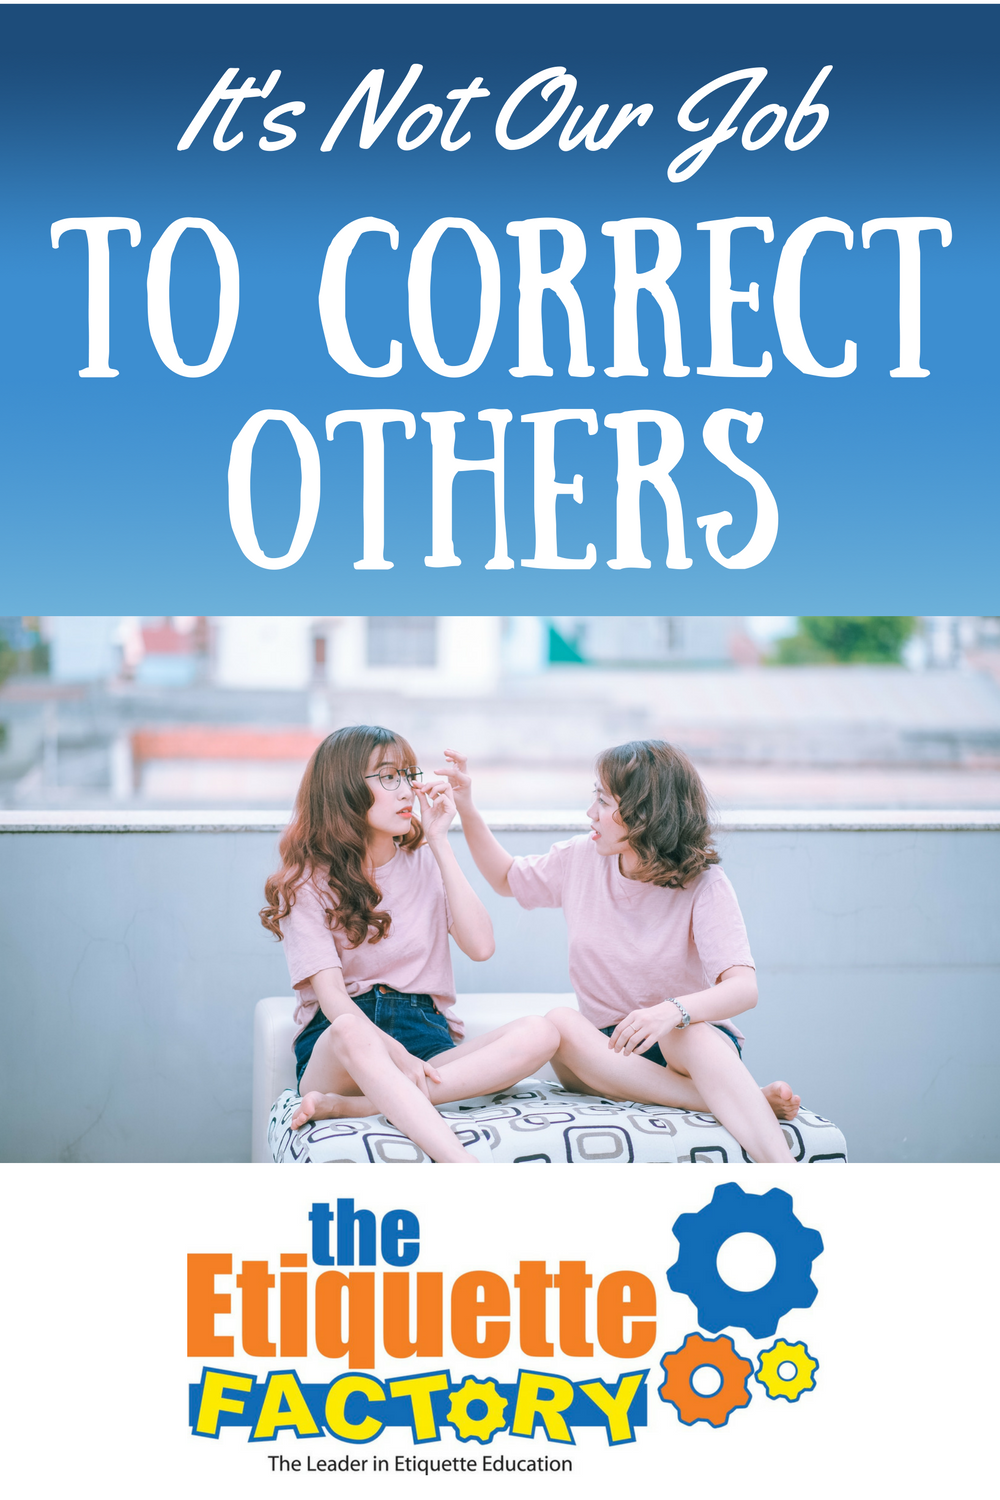 The Etiquette Factory Blog: It's Not Our Job to Correct Others